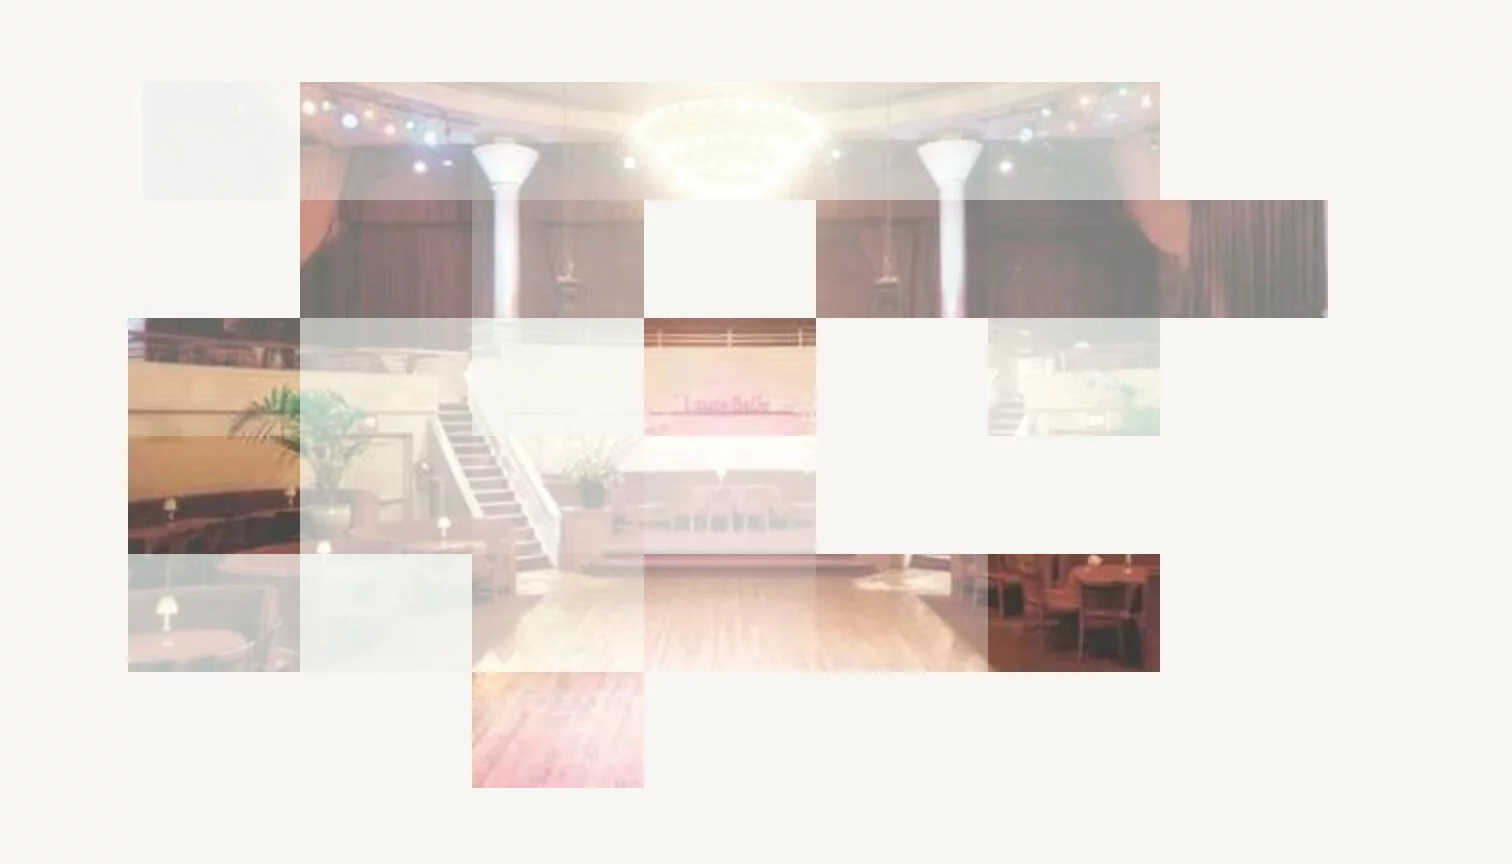 Against a white background, several rectangles of varying levels of visibility reveal an incomplete image of a large, columned room with small tables organized around a dance floor.